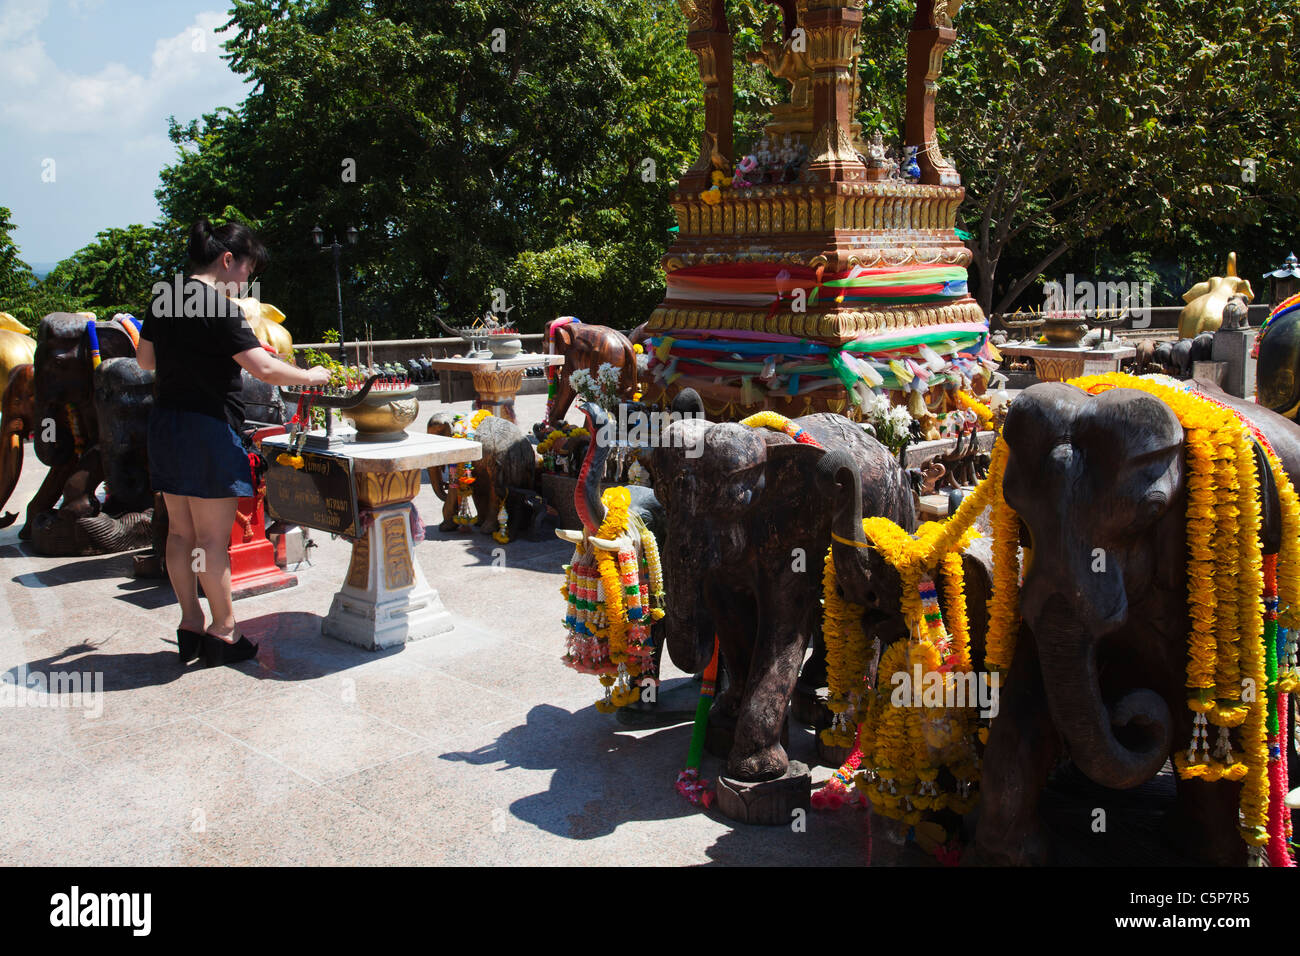 Thai Buddhist praying at open air Buddhist temple devoted to sacred elephants at Cape Promthep. Stock Photo